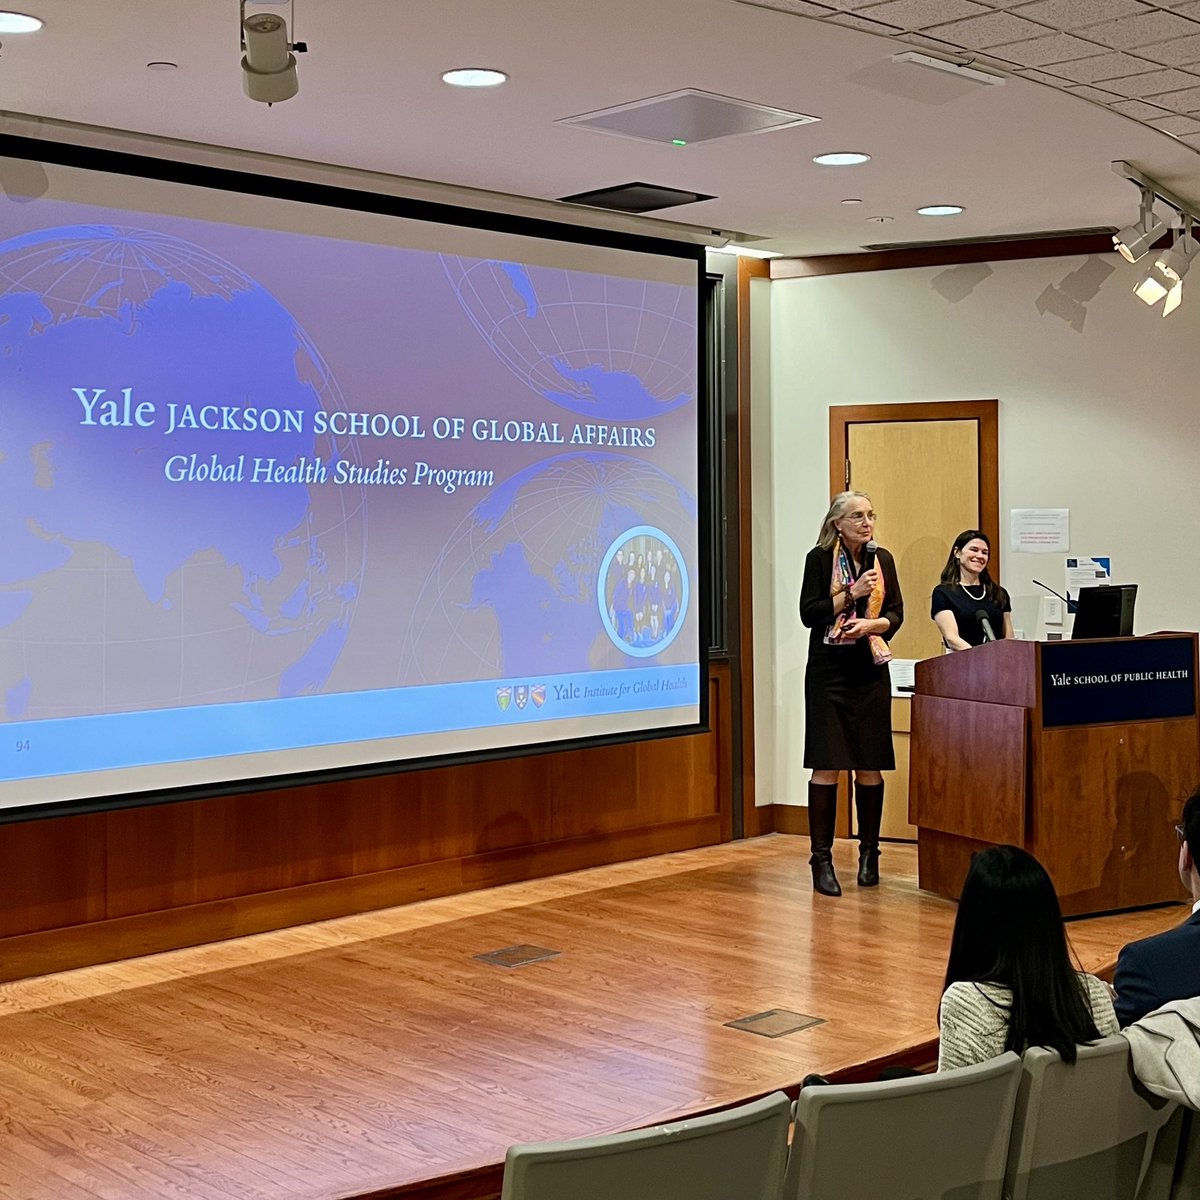 Catherine Panter-Brick and Cara Fallon, from the Jackson School of Global Affairs, presented on the Undergraduate Global Health Studies Program: an interdisciplinary program with a goal to build university-wide connections 📚 Learn more bit.ly/4cKOYZ2